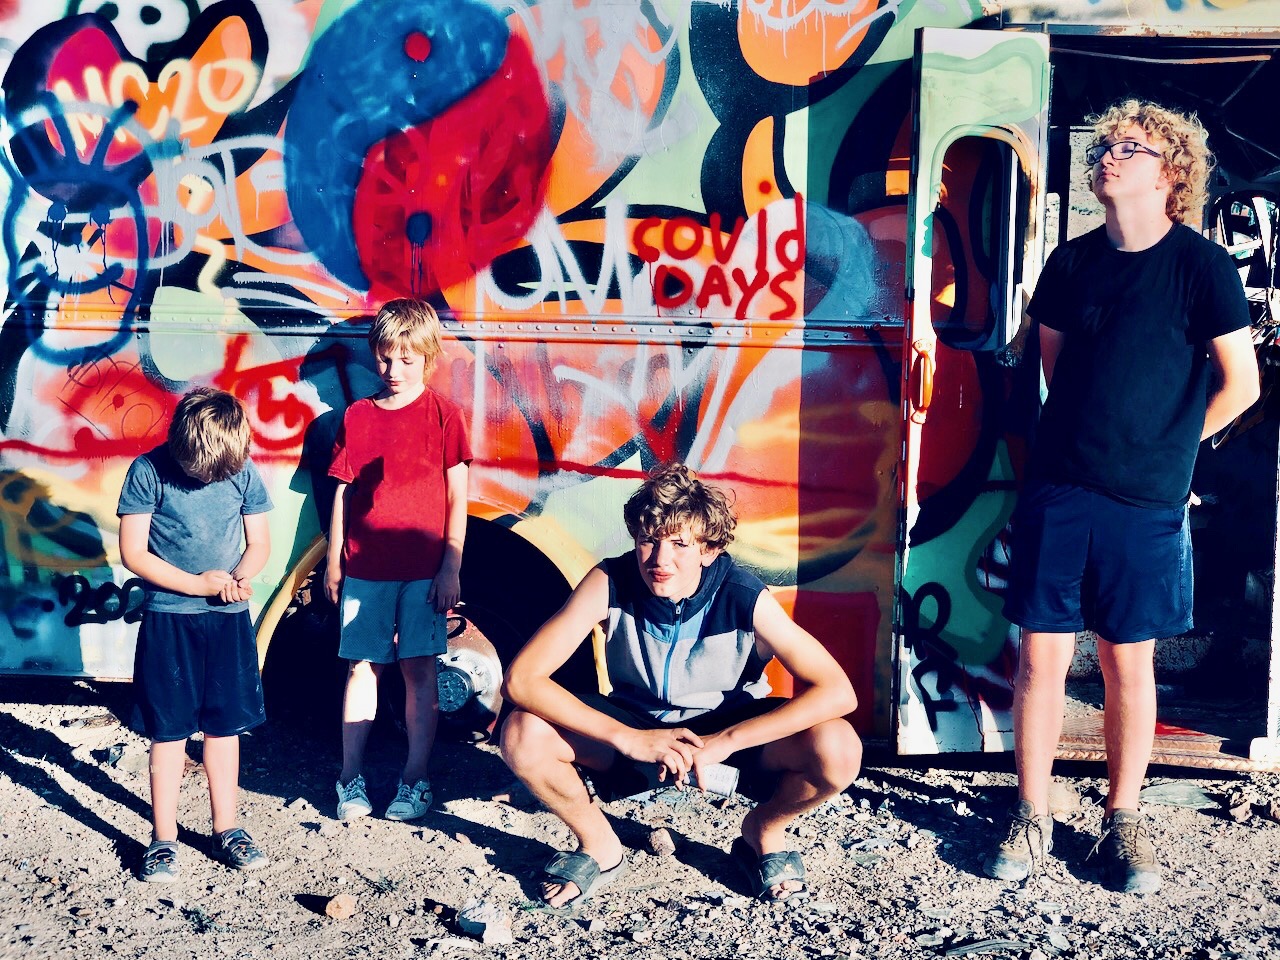 Four kids in front of a spray-painted bus with "COVID Days" written on the bus.